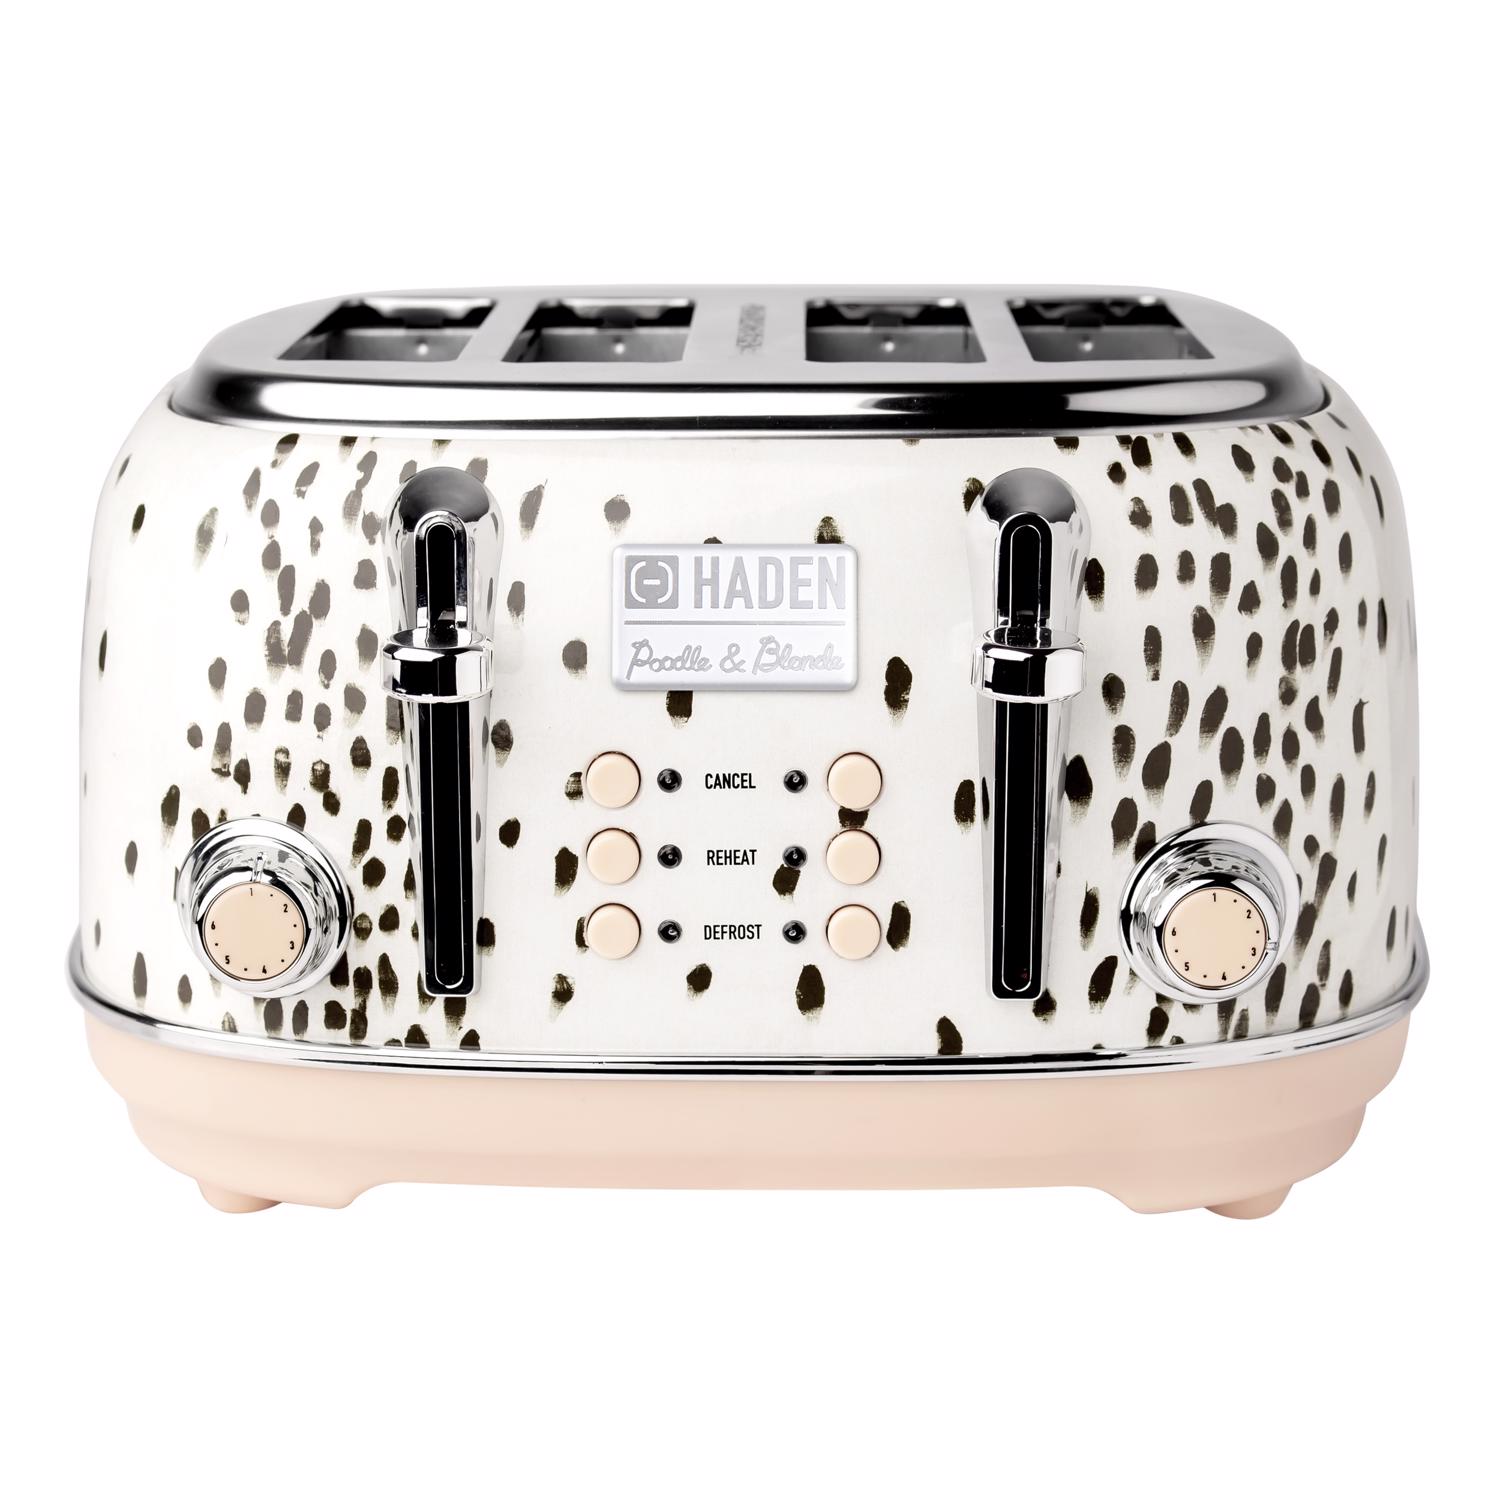 Photos - Toaster Haden Poodle & Blonde Stainless Steel Cream 4 slot  8 in. H X 12 in 